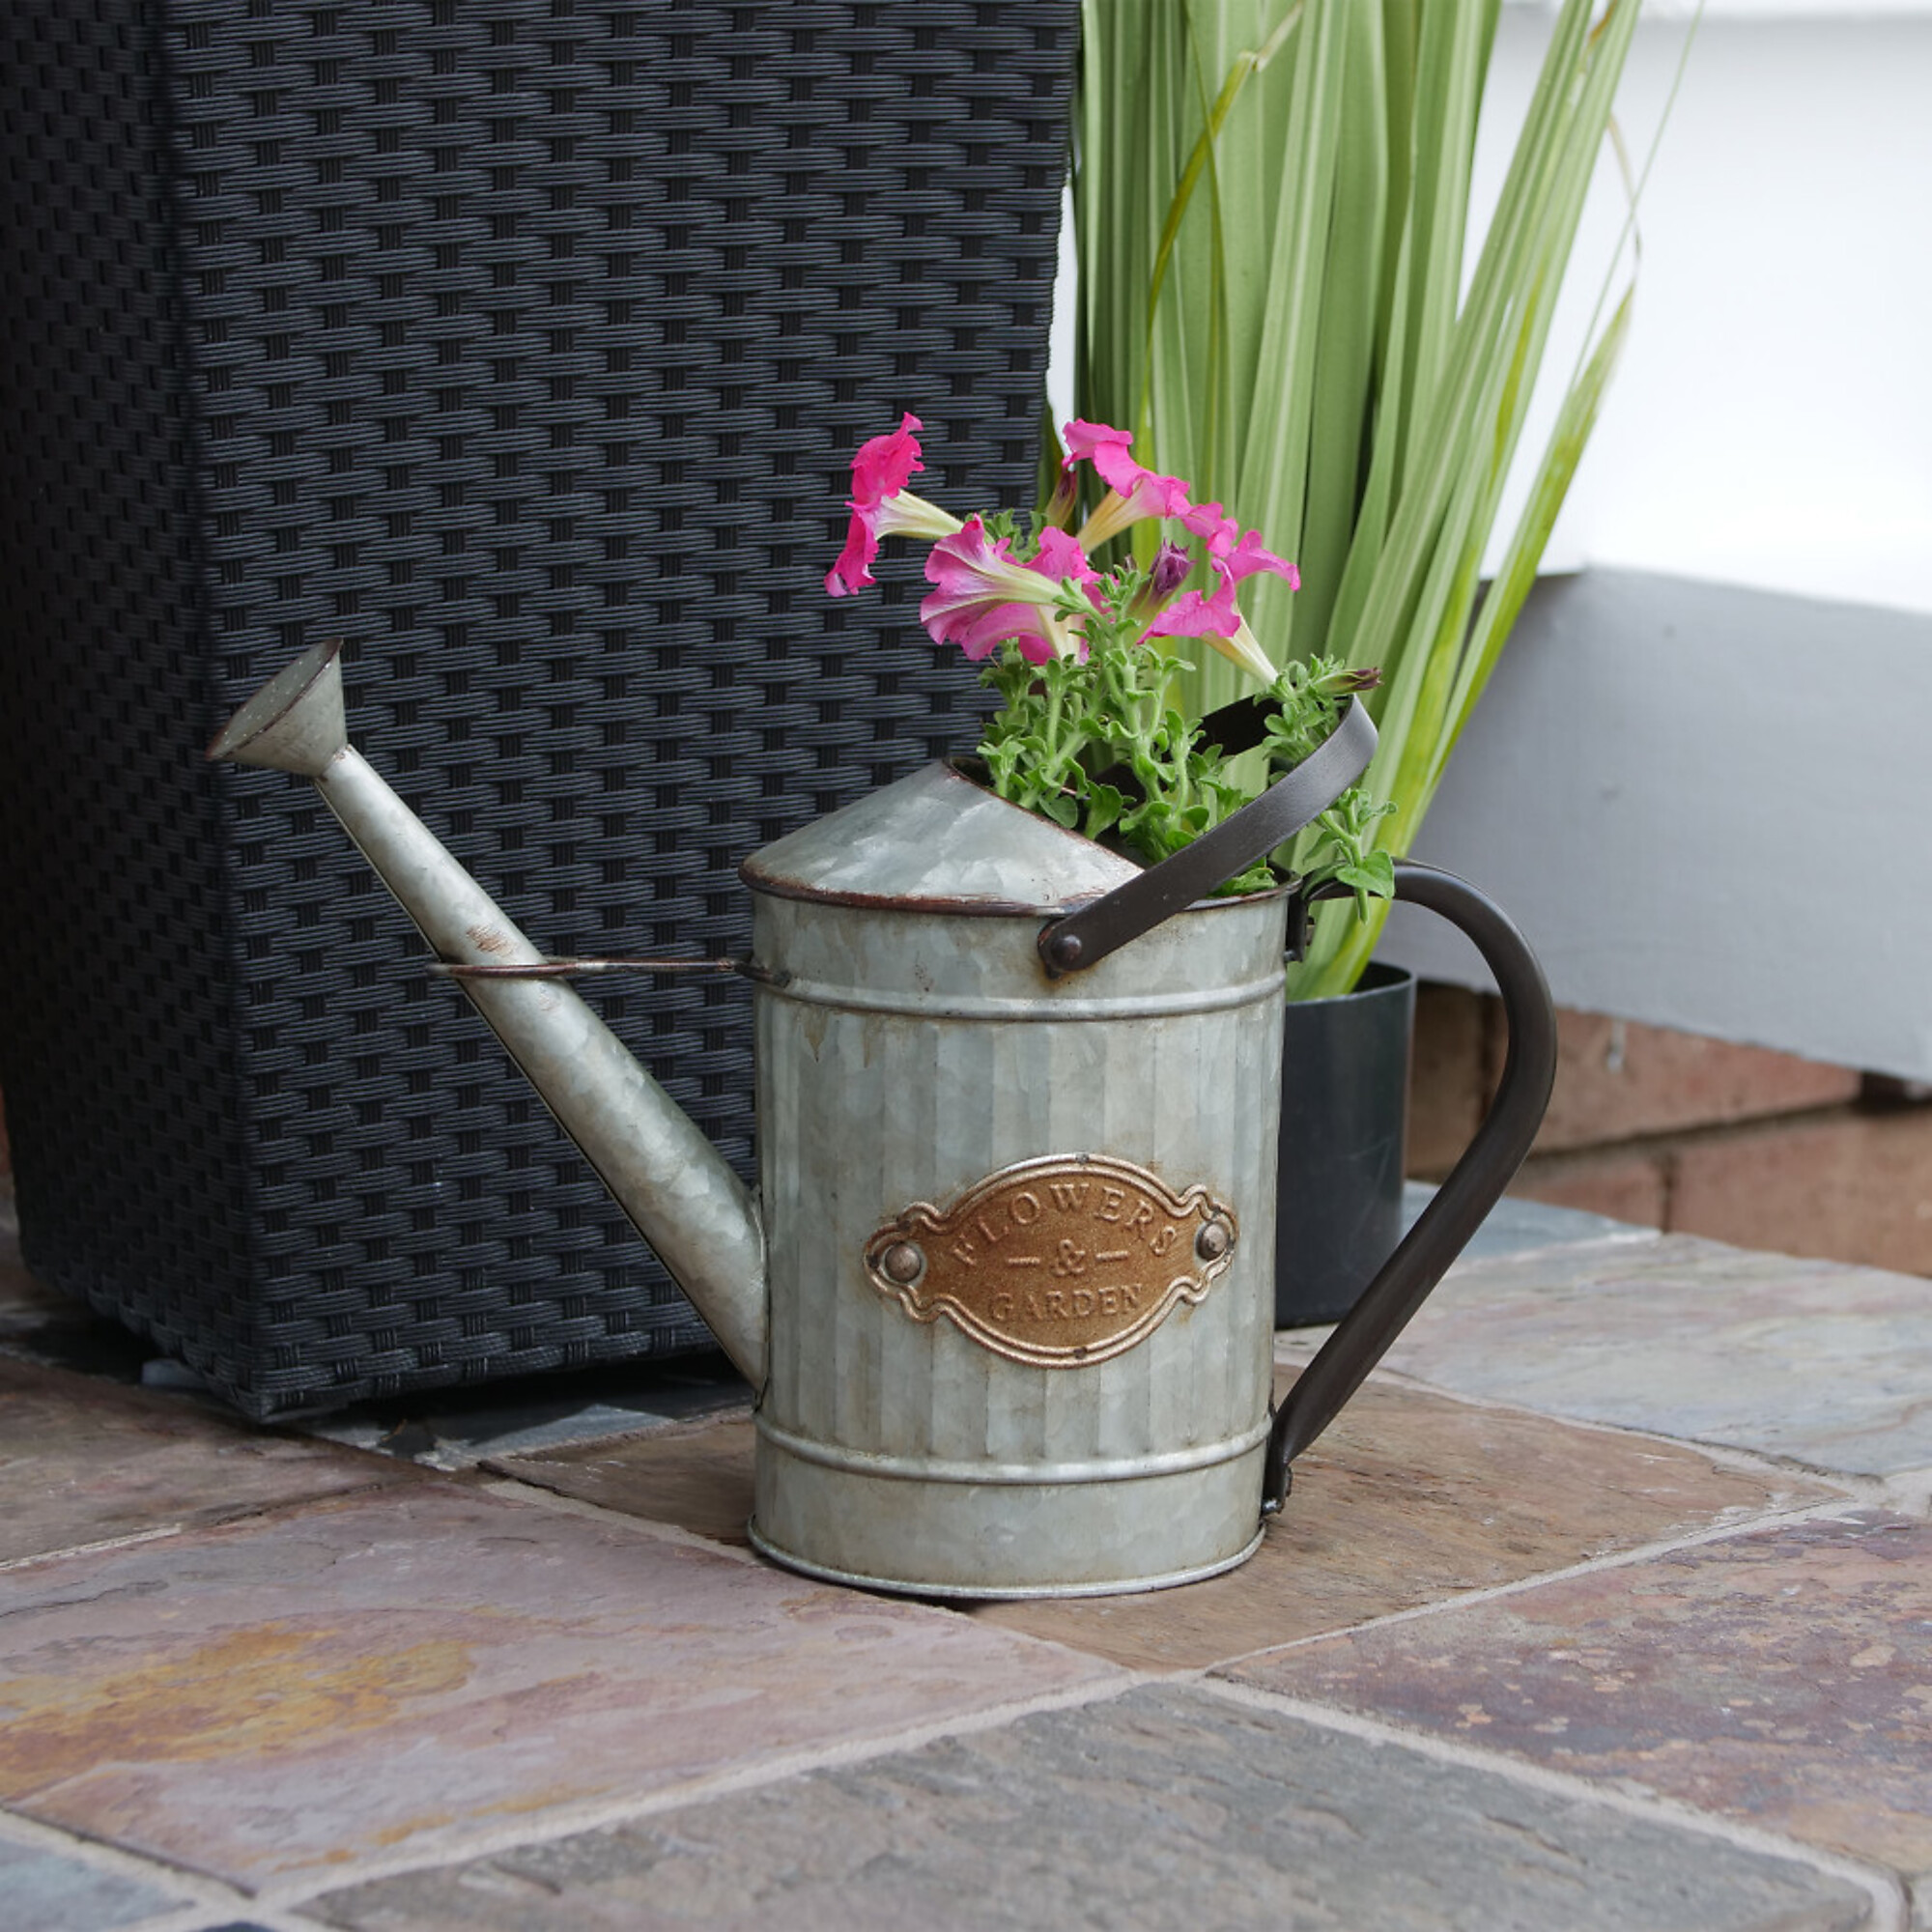 Alpine Corporation, Decorative Watering Can Planter Vintage Style, Material Metal, Model YHL164HH-S